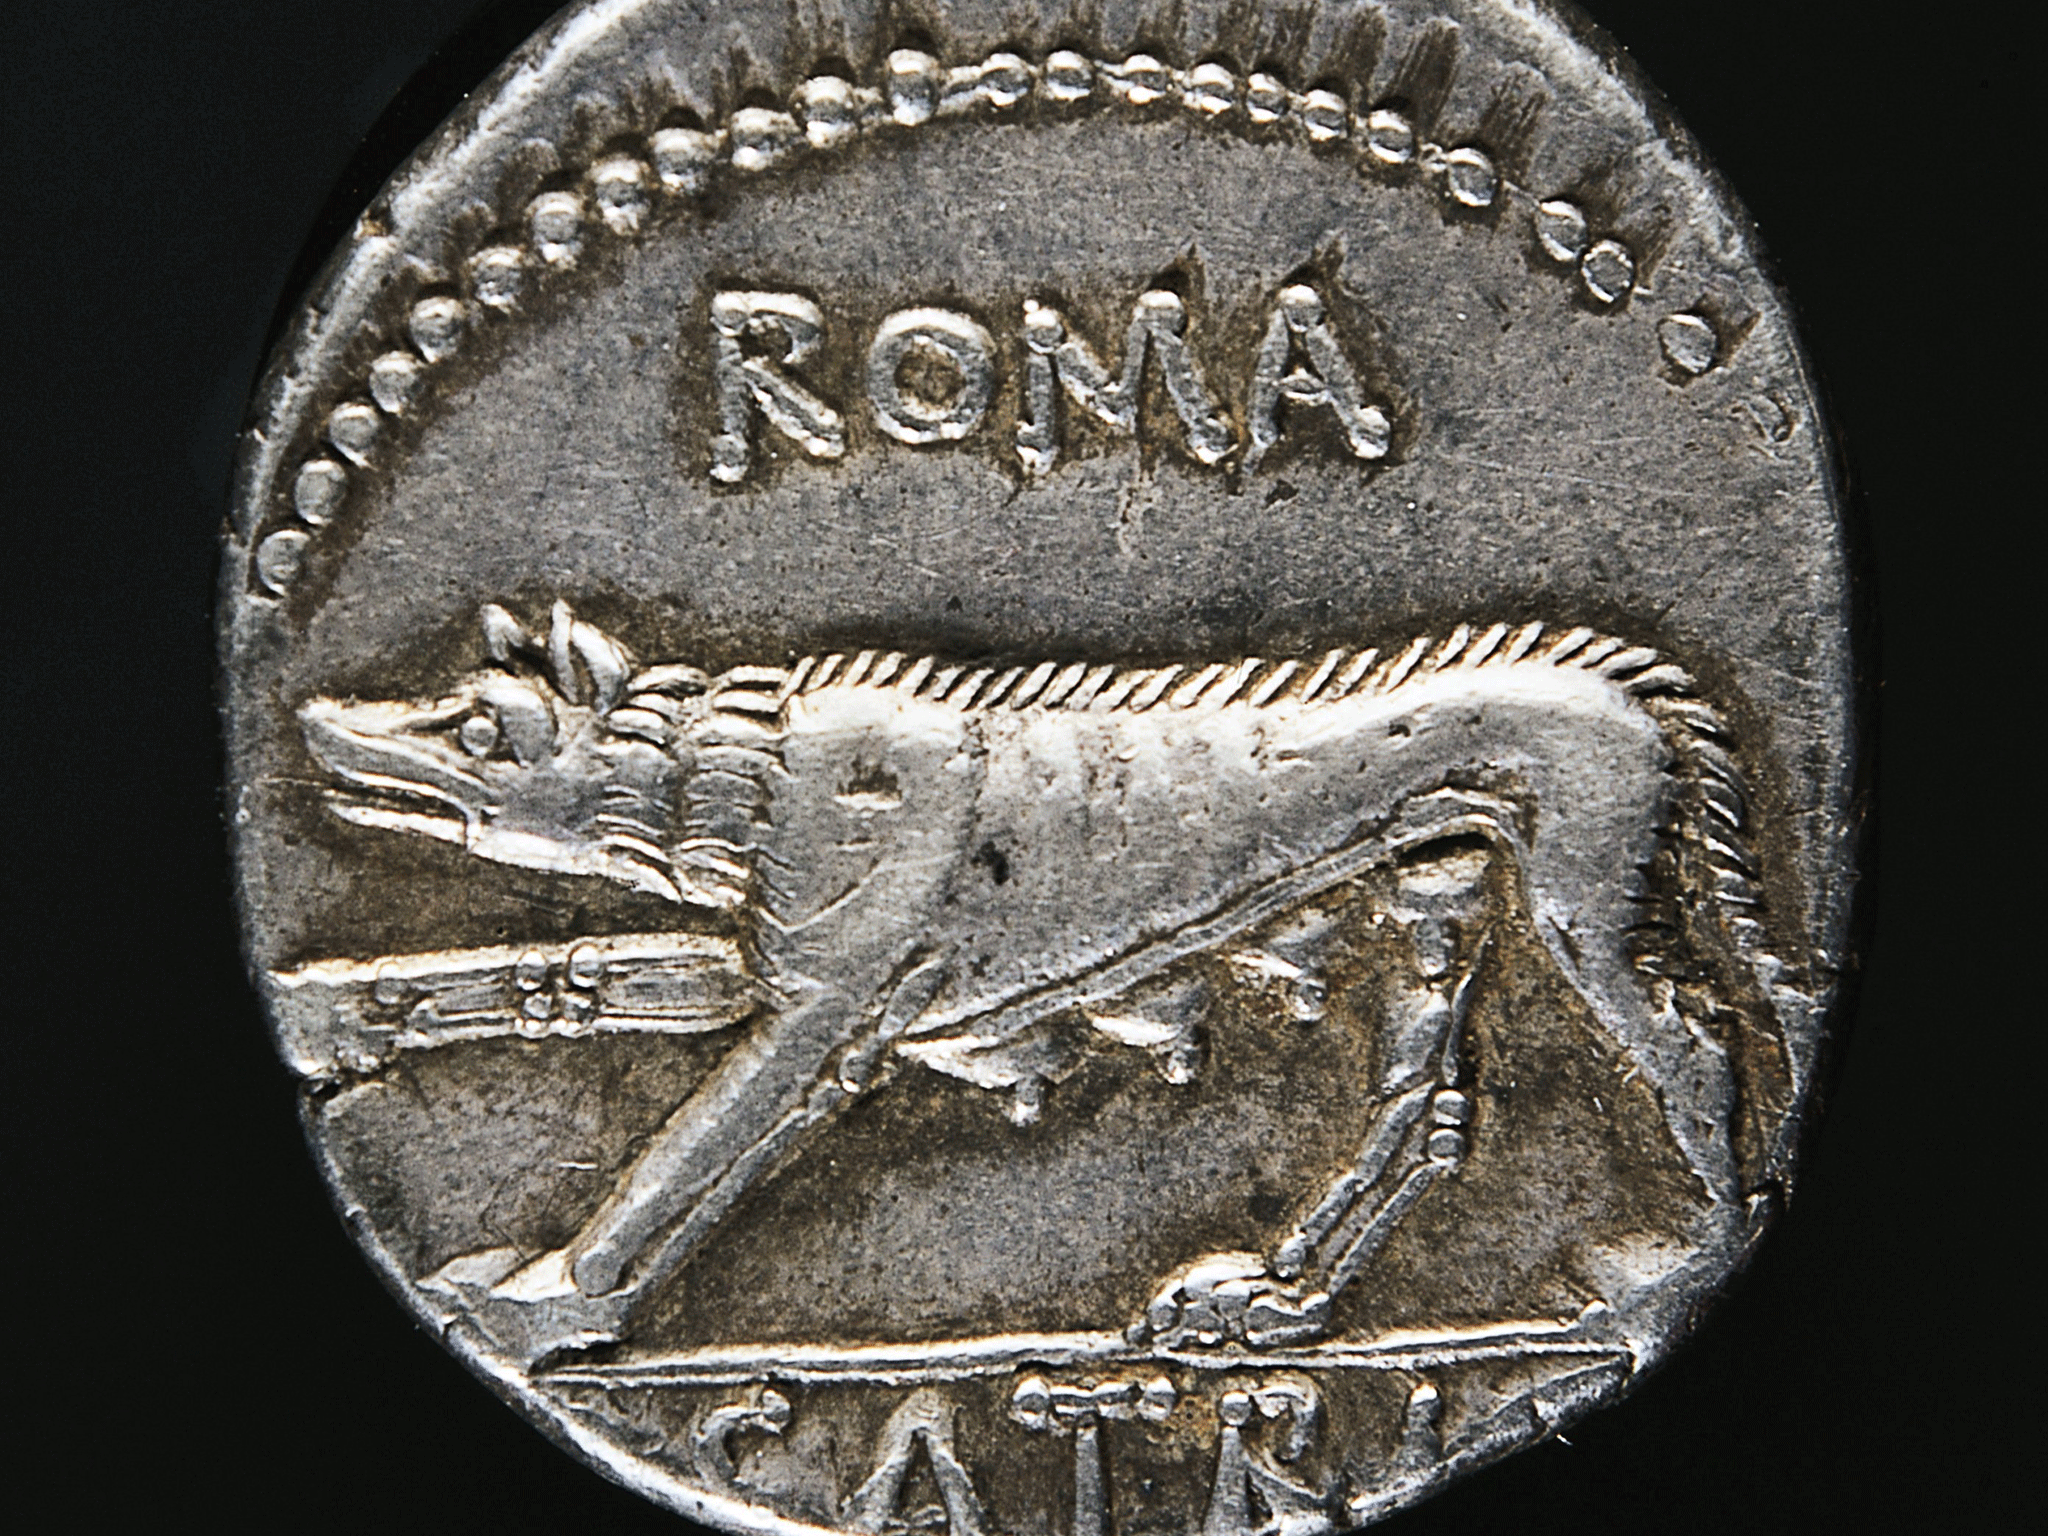 The limited extent of Roman's expansion and influence into south-west Britain has been challenged by the discovery of 150 Roman coins